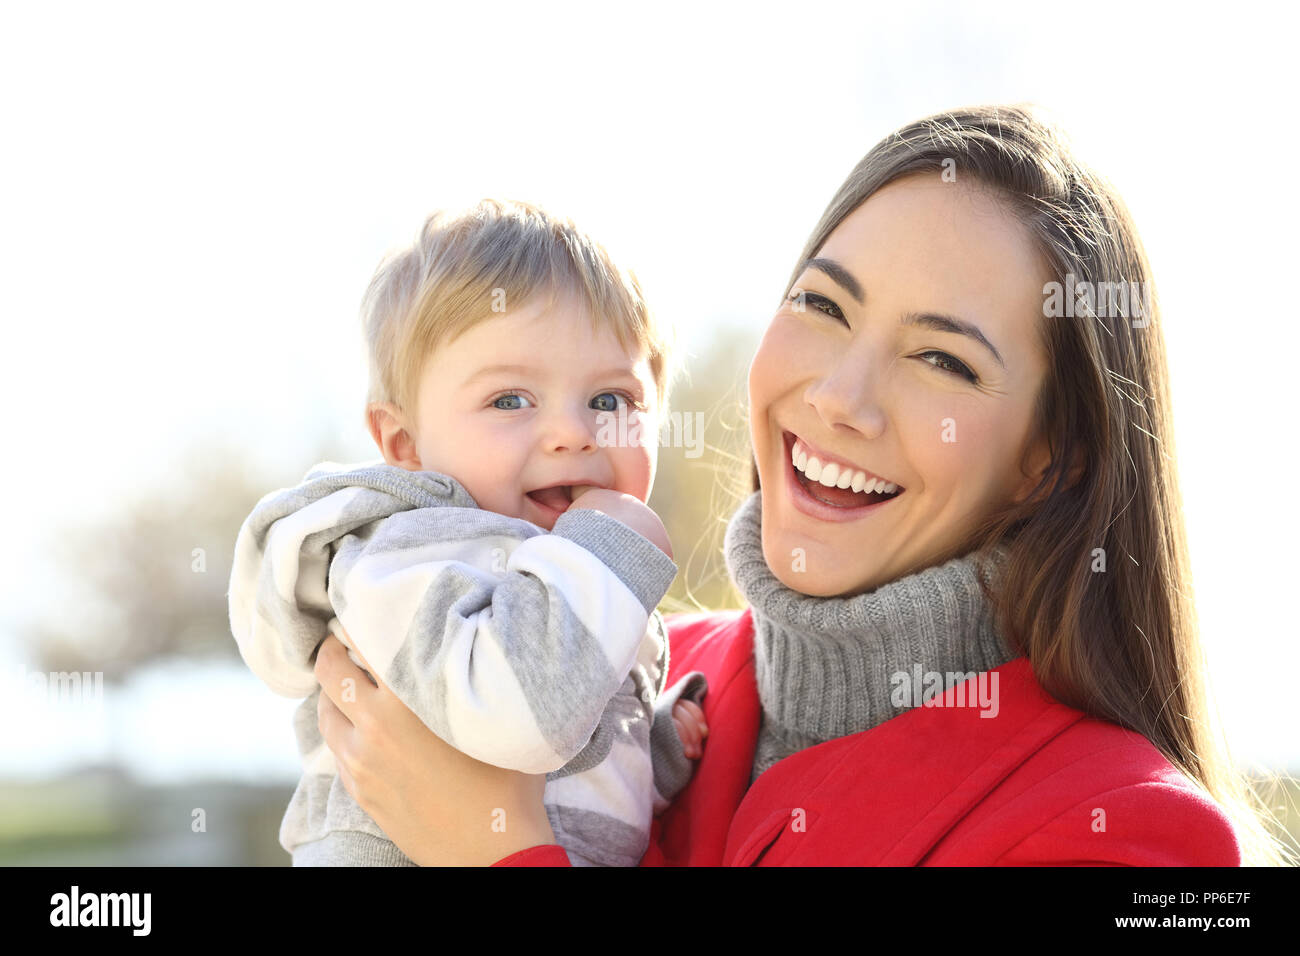 Portrait of a happy baby and mother posing looking at camera outdoors in winter Stock Photo